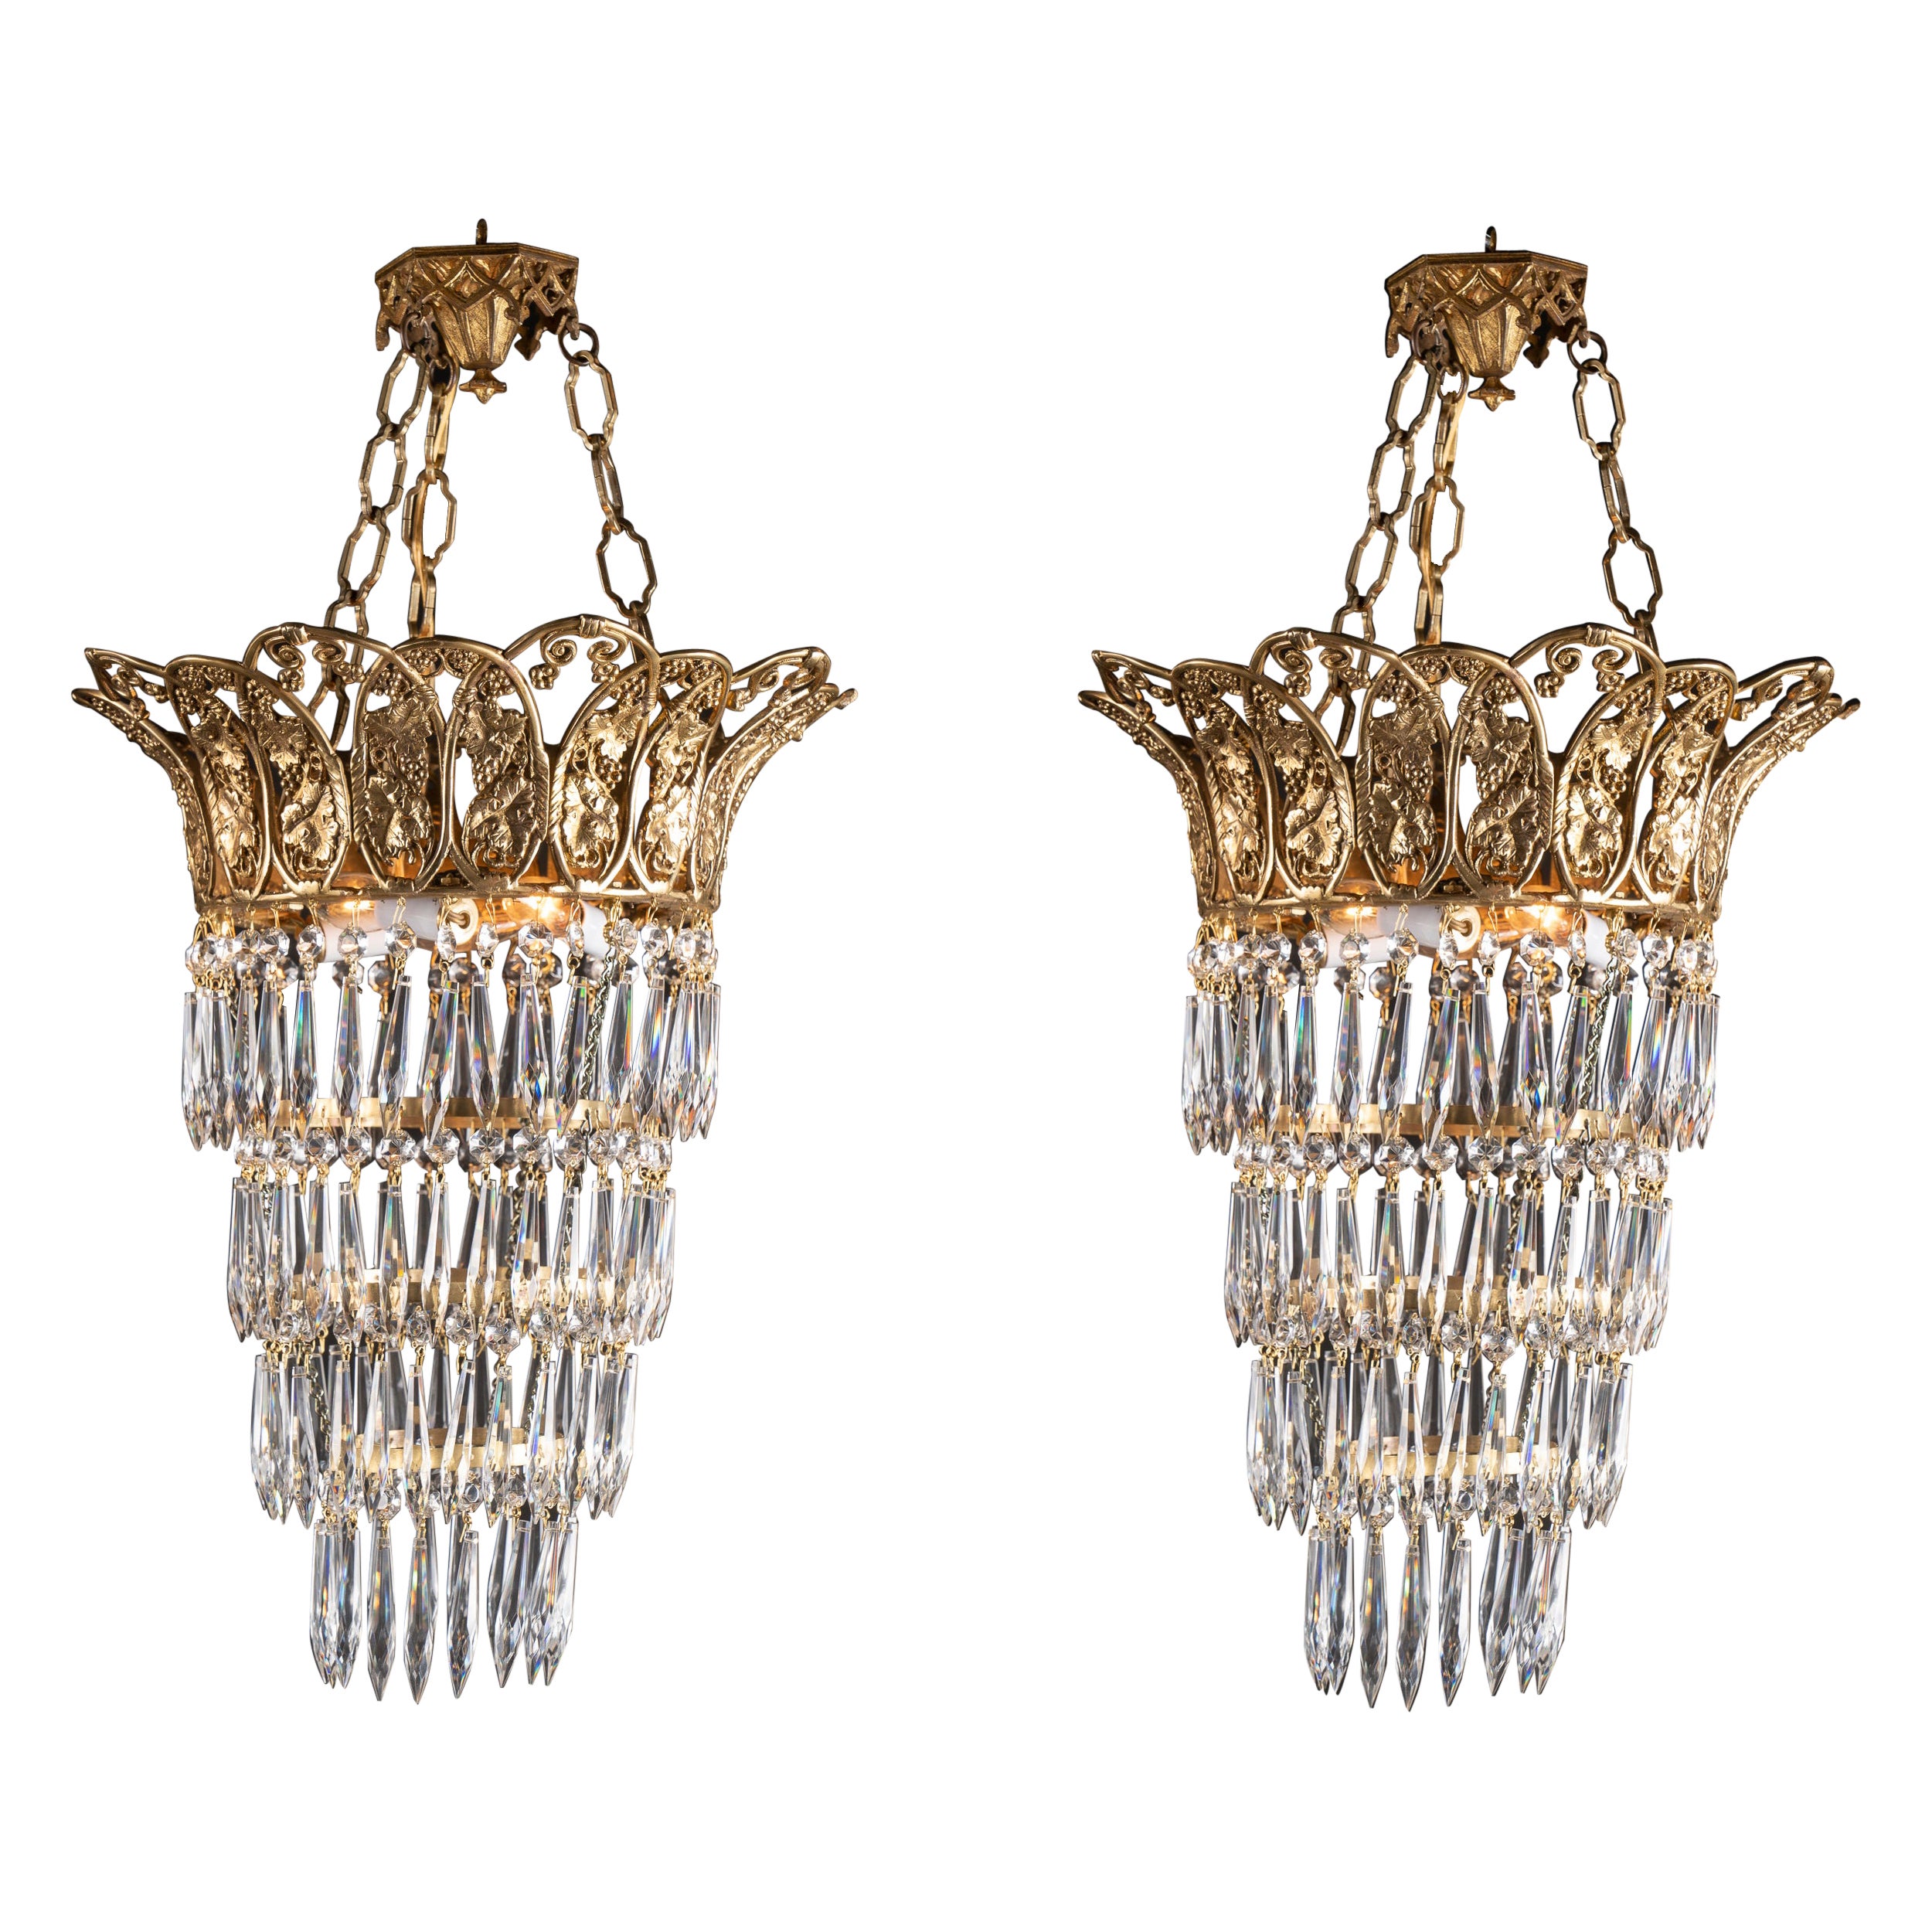 Pair of Louis XVI Bronze Chandeliers with Crystals, French 19th Century For Sale